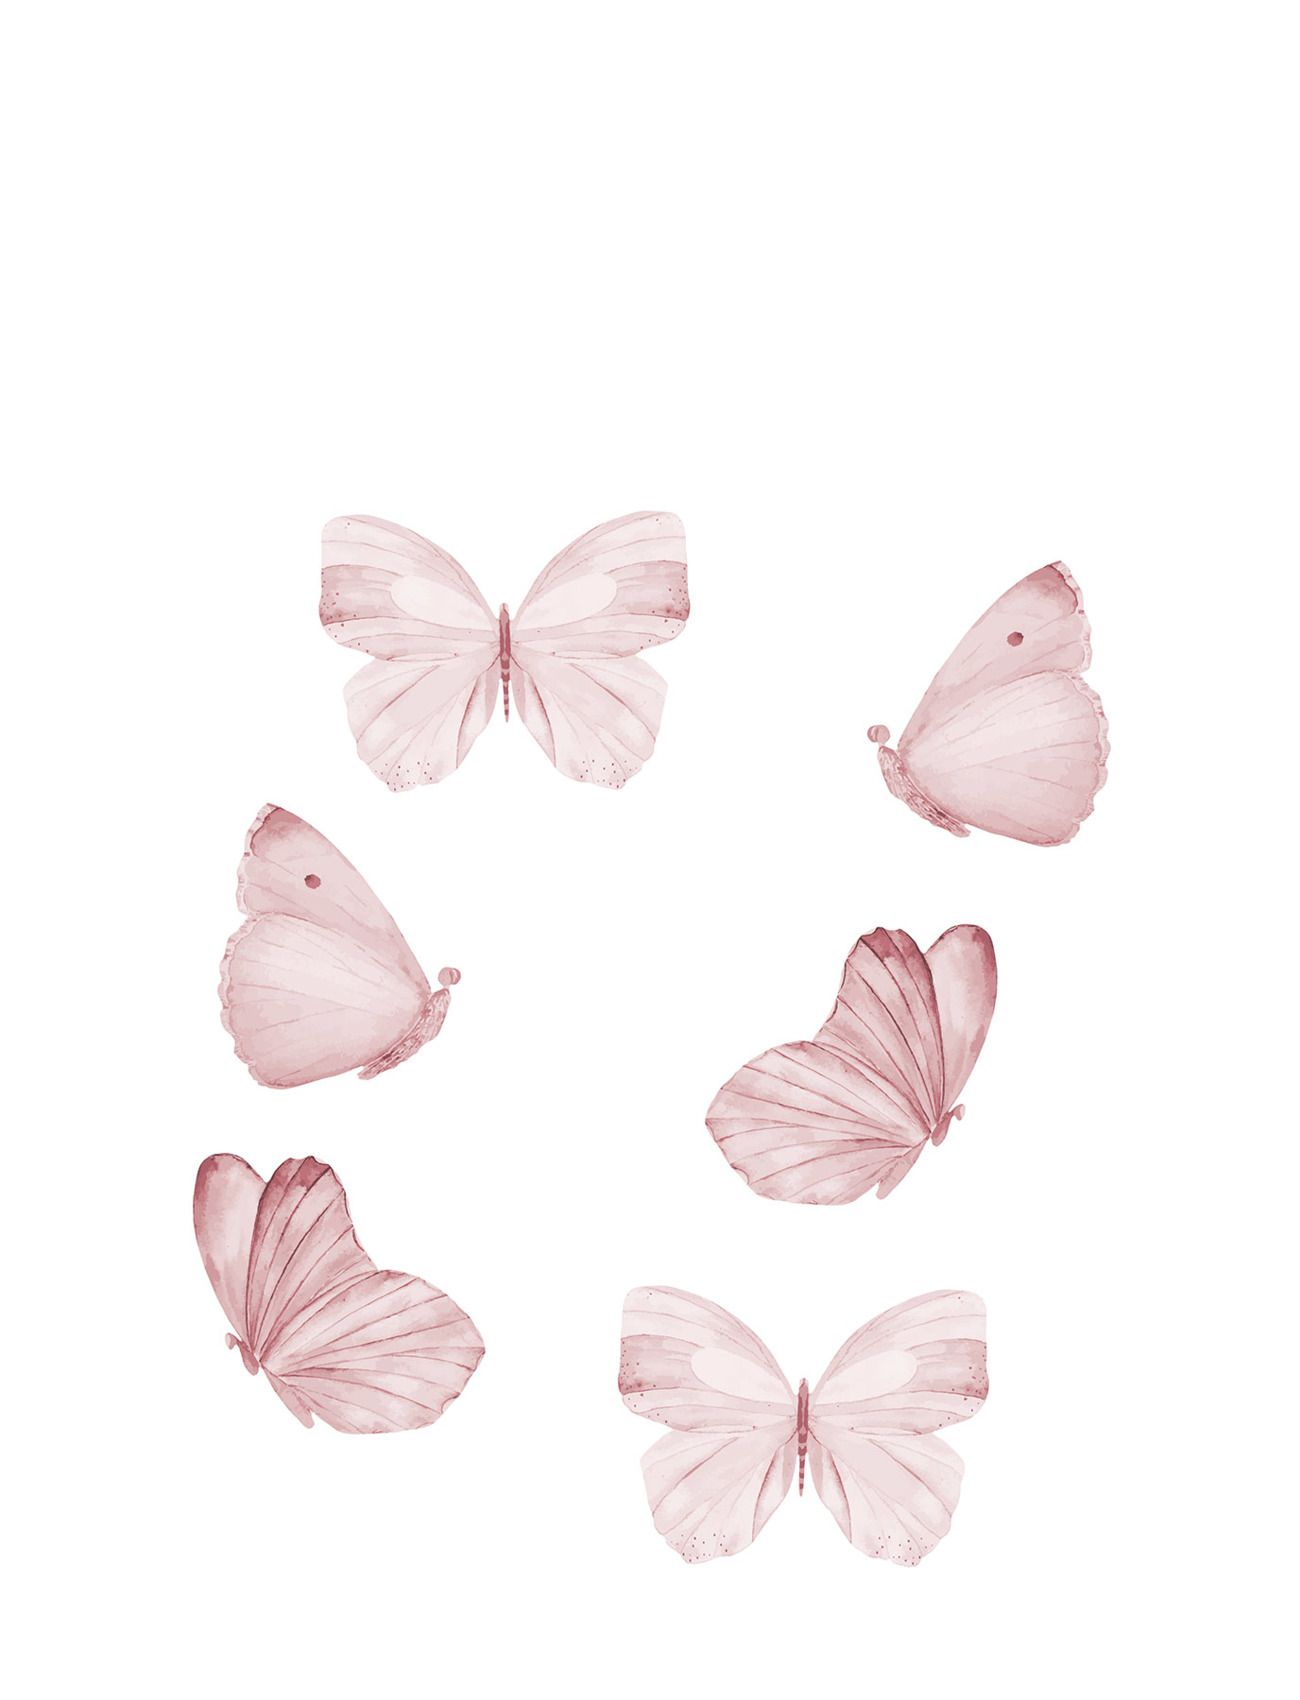 That's Write Wall Sticker Butterfly Set Of 6 Rose Home Kids Decor Wall Stickers Rosa That's Mine